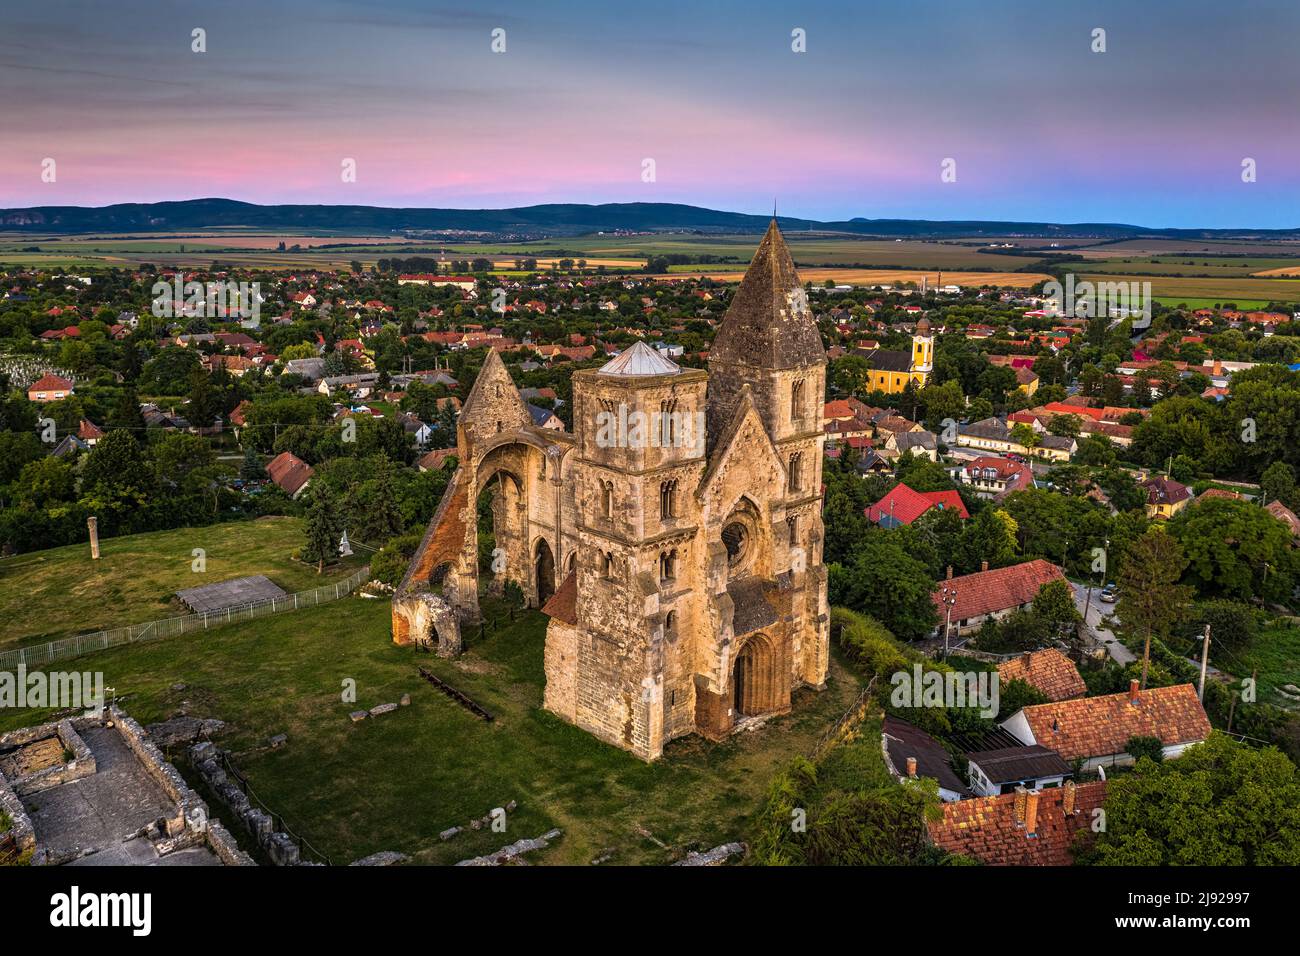 Zsambek, Hungary - Aerial view of the beautiful Premontre Monastery ruin church of Zsambek (Schambeck) with cemetery and ccolorful sky at background a Stock Photo